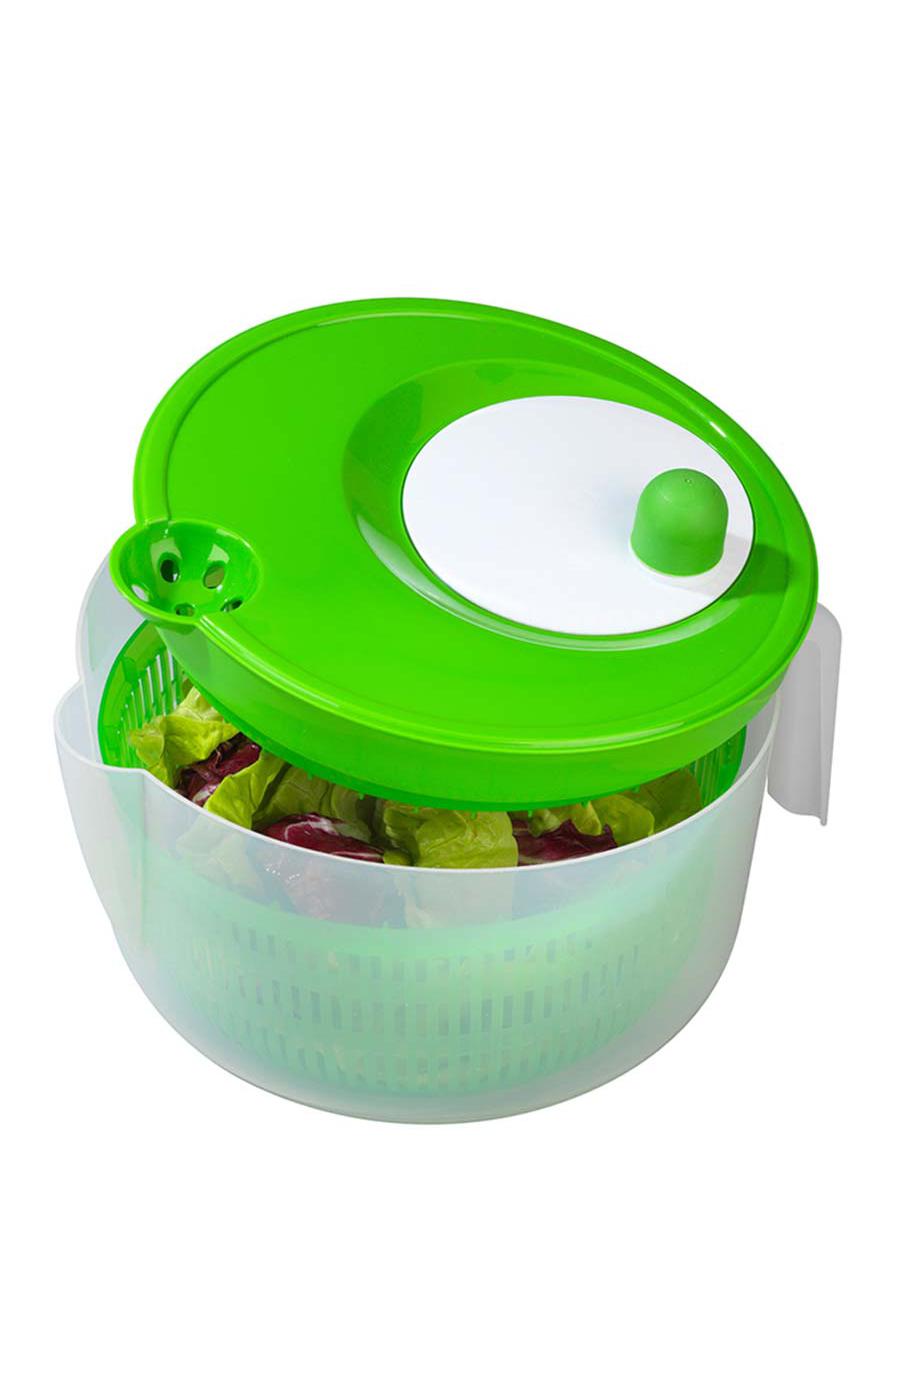 GoodCook Deluxe Salad Spinner; image 2 of 2